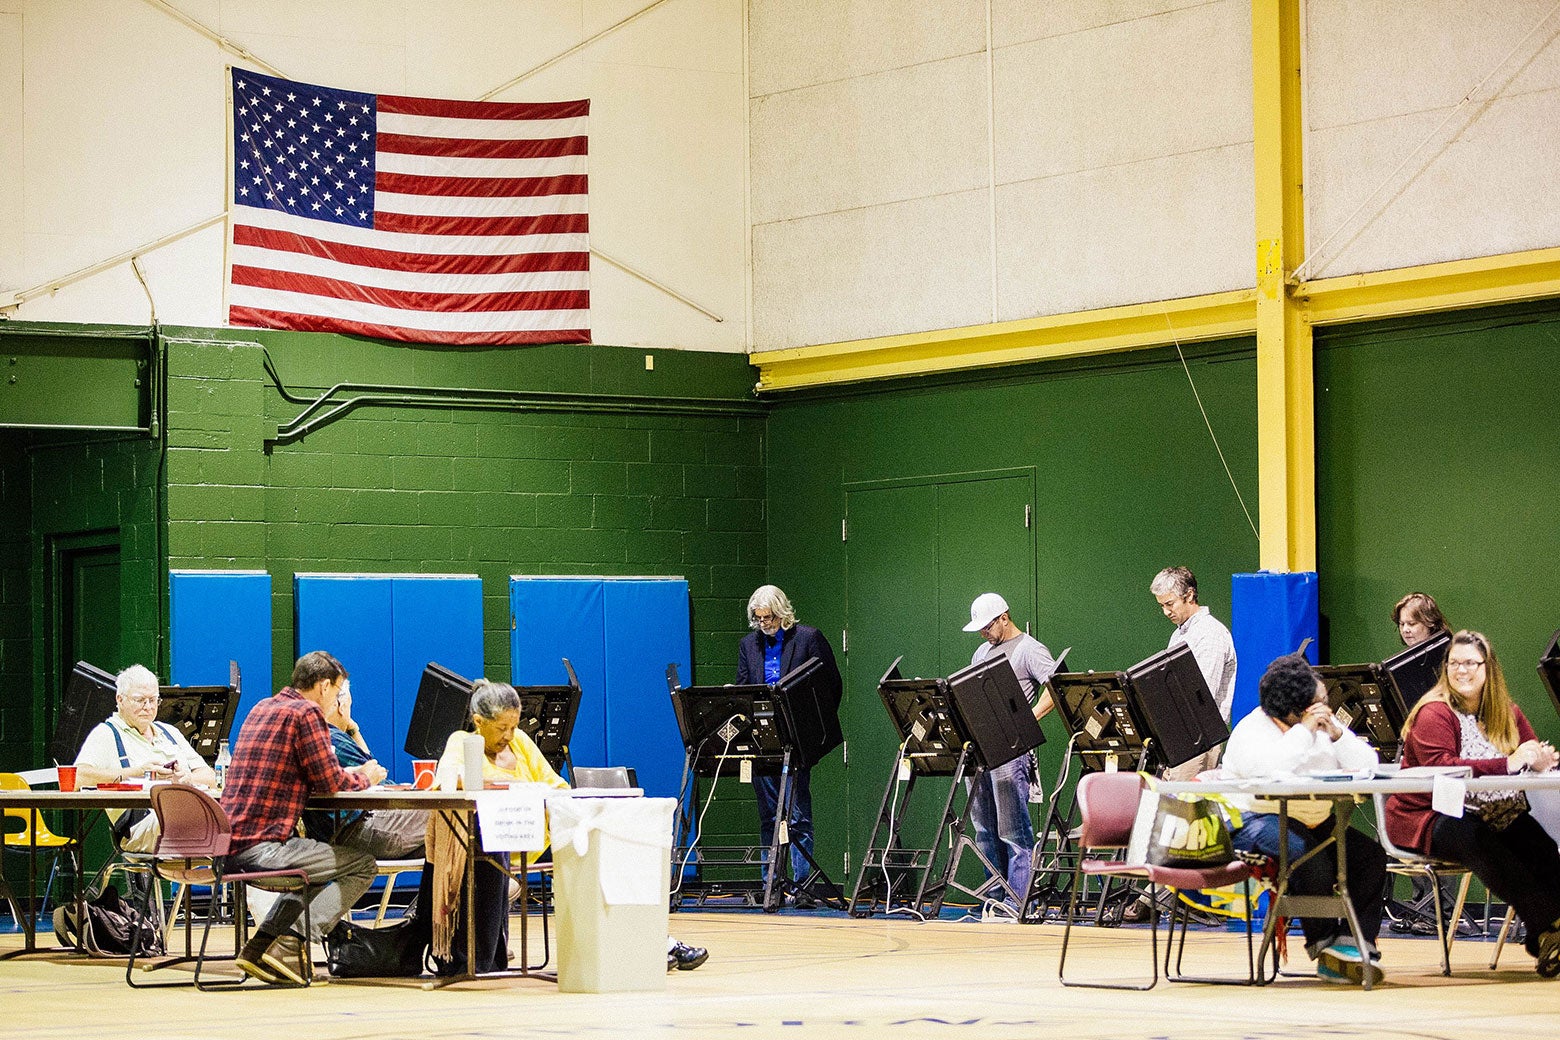 Voters stand behind electronic machines in a rec center gym.